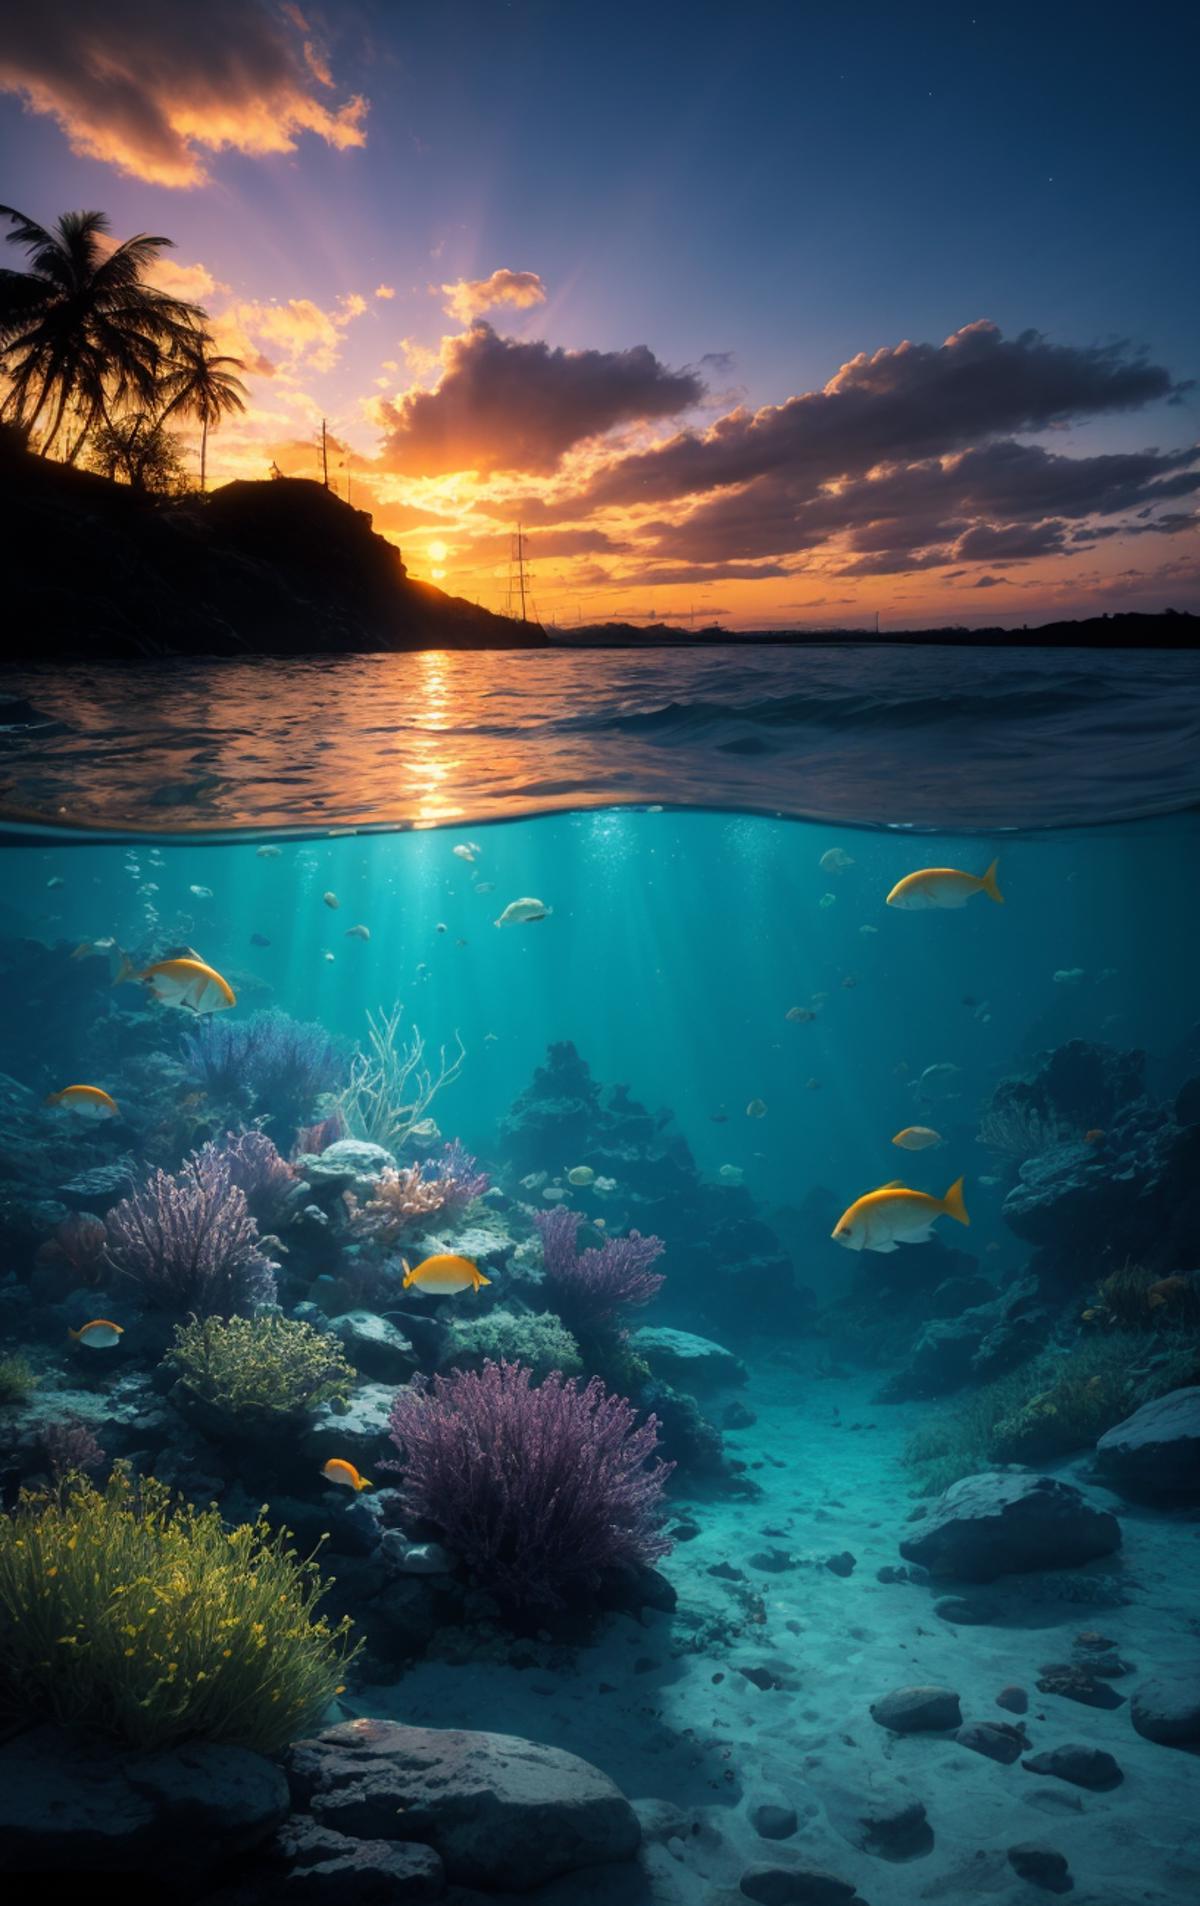 Sunset over a tropical ocean with fish and coral reef